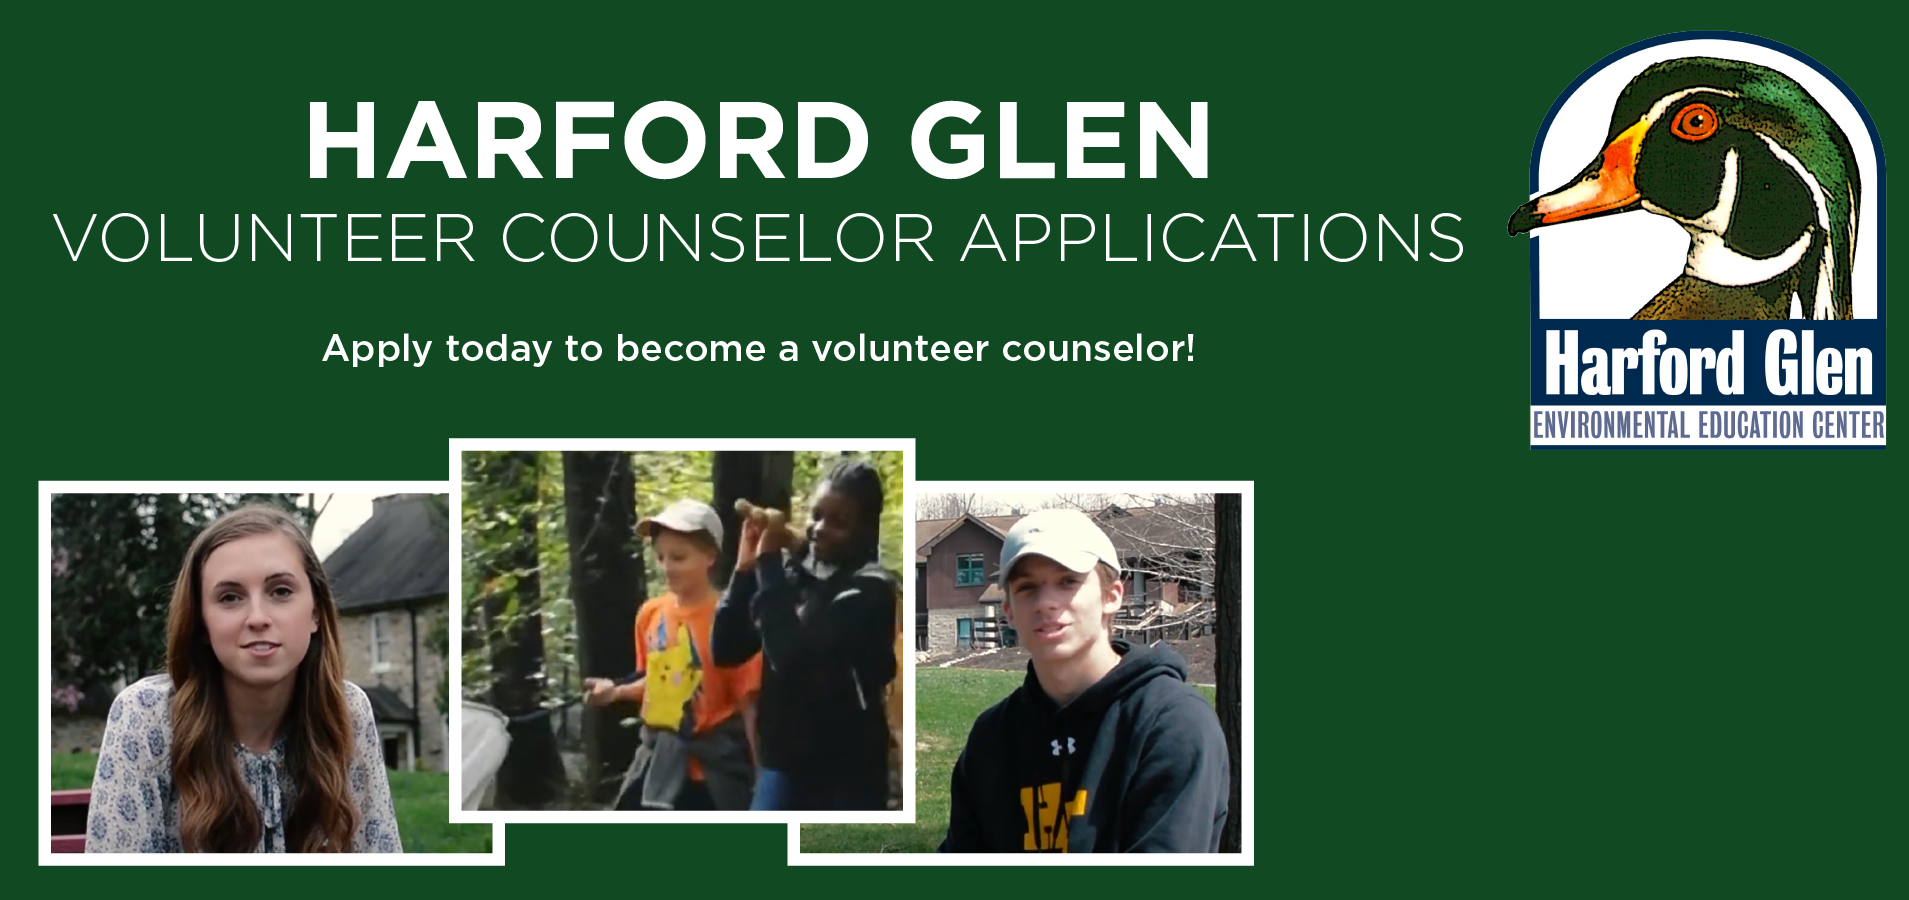 Harford Glen Volunteer Counselor Application now available